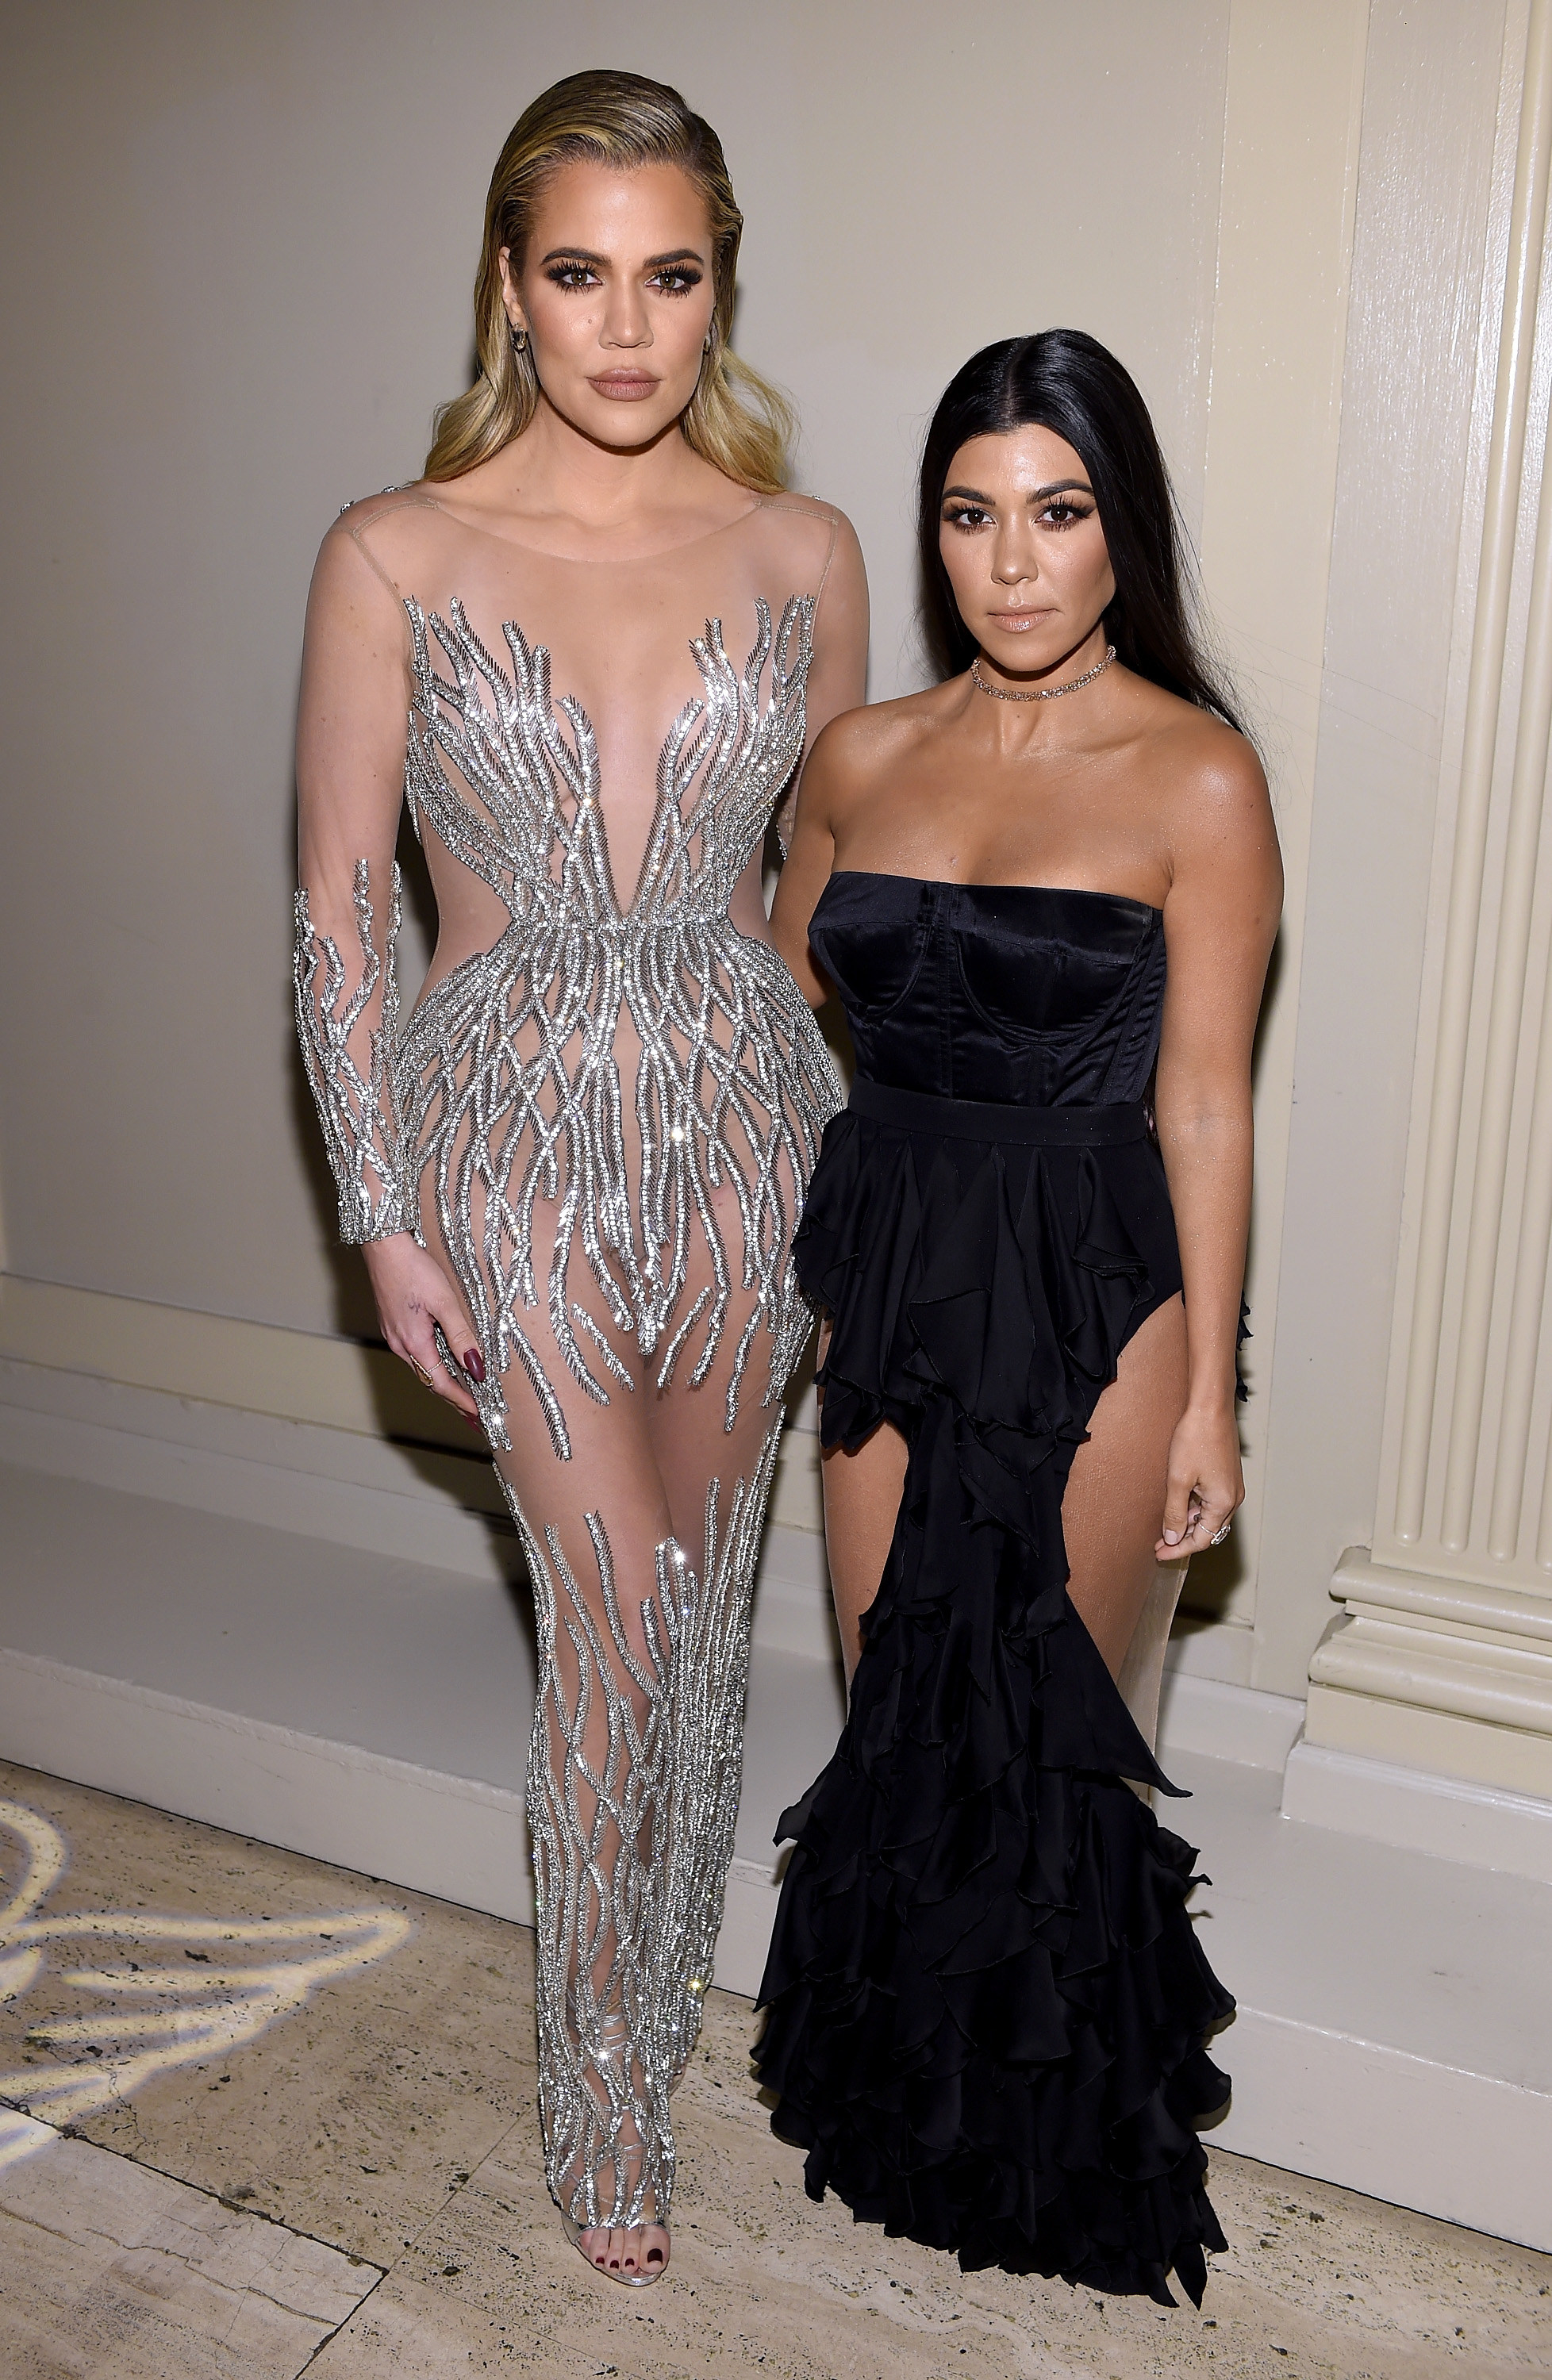 Khloé and Kourtney standing together and looking serious